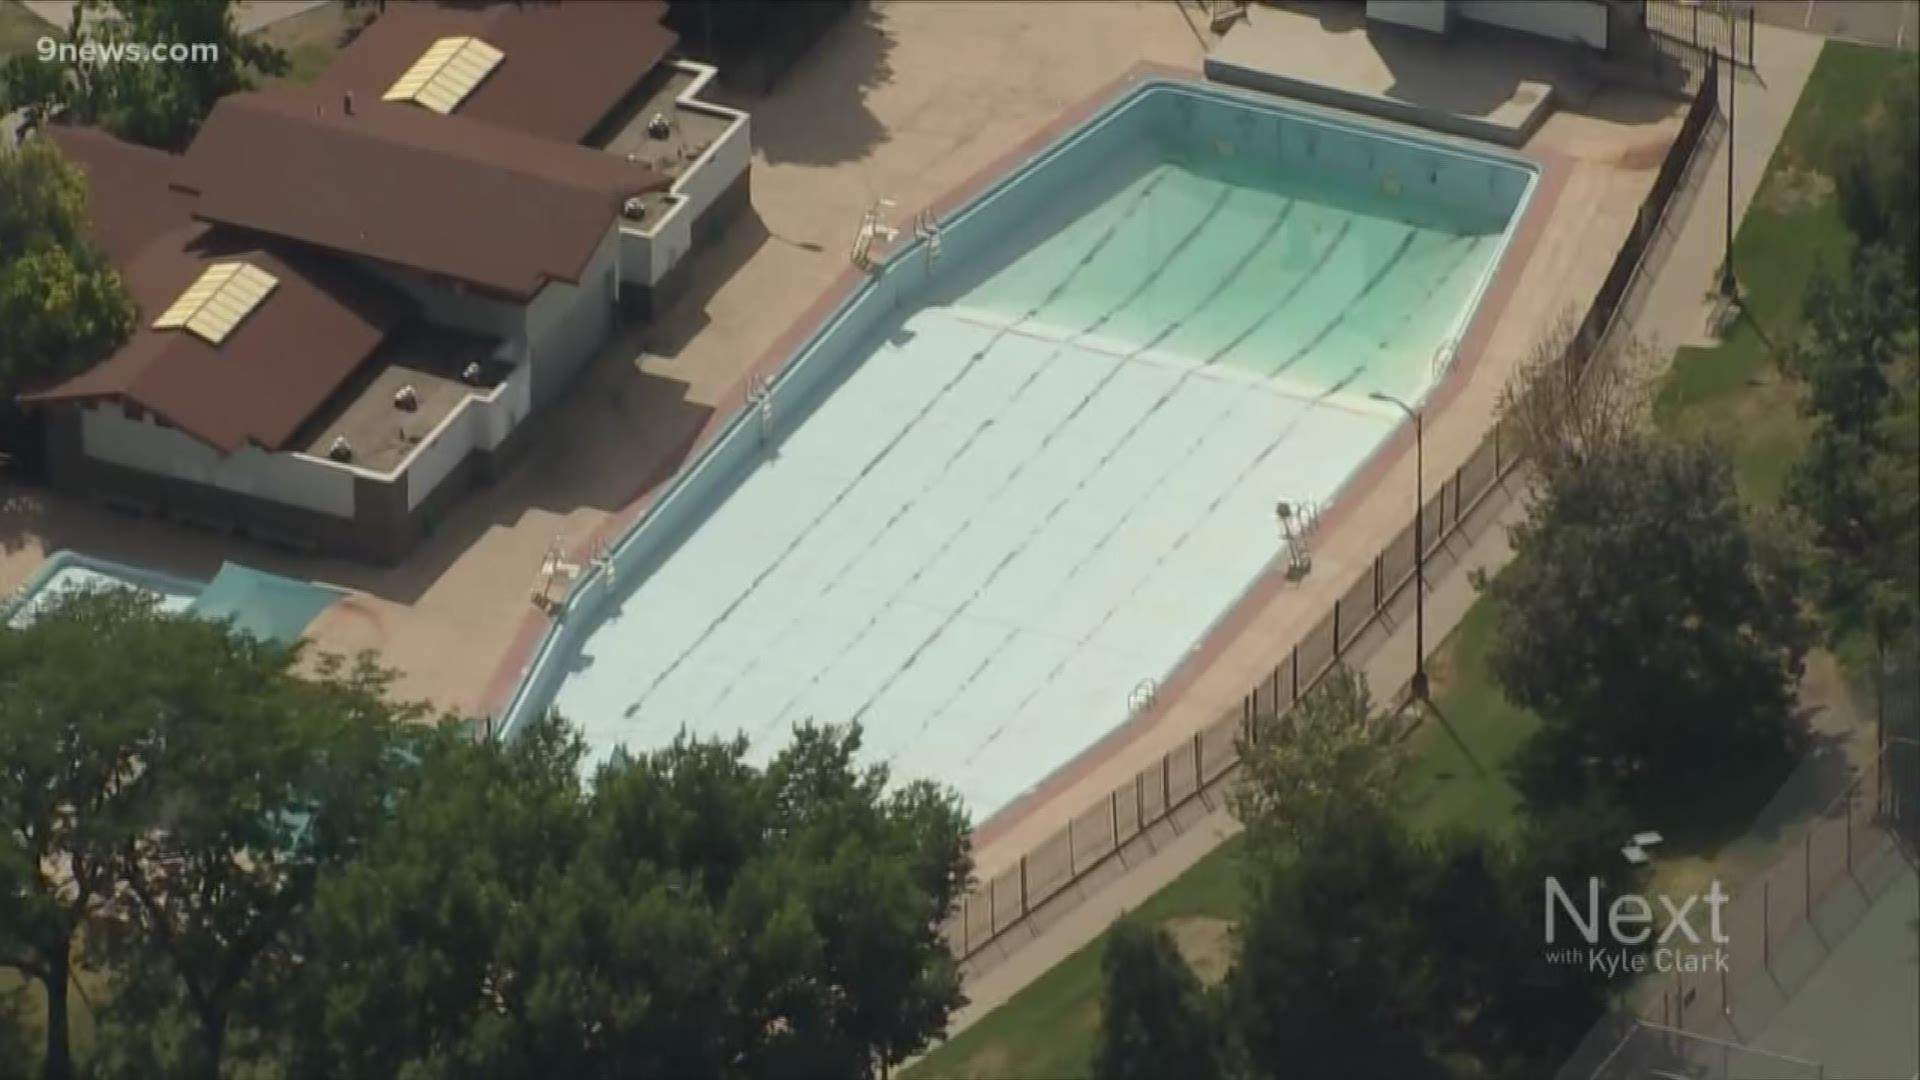 Our Next Question comes from a viewer named Pat Thompson, who noticed many of Denver's outdoor swimming pools are closed for the season, even though we broke a temperature record.